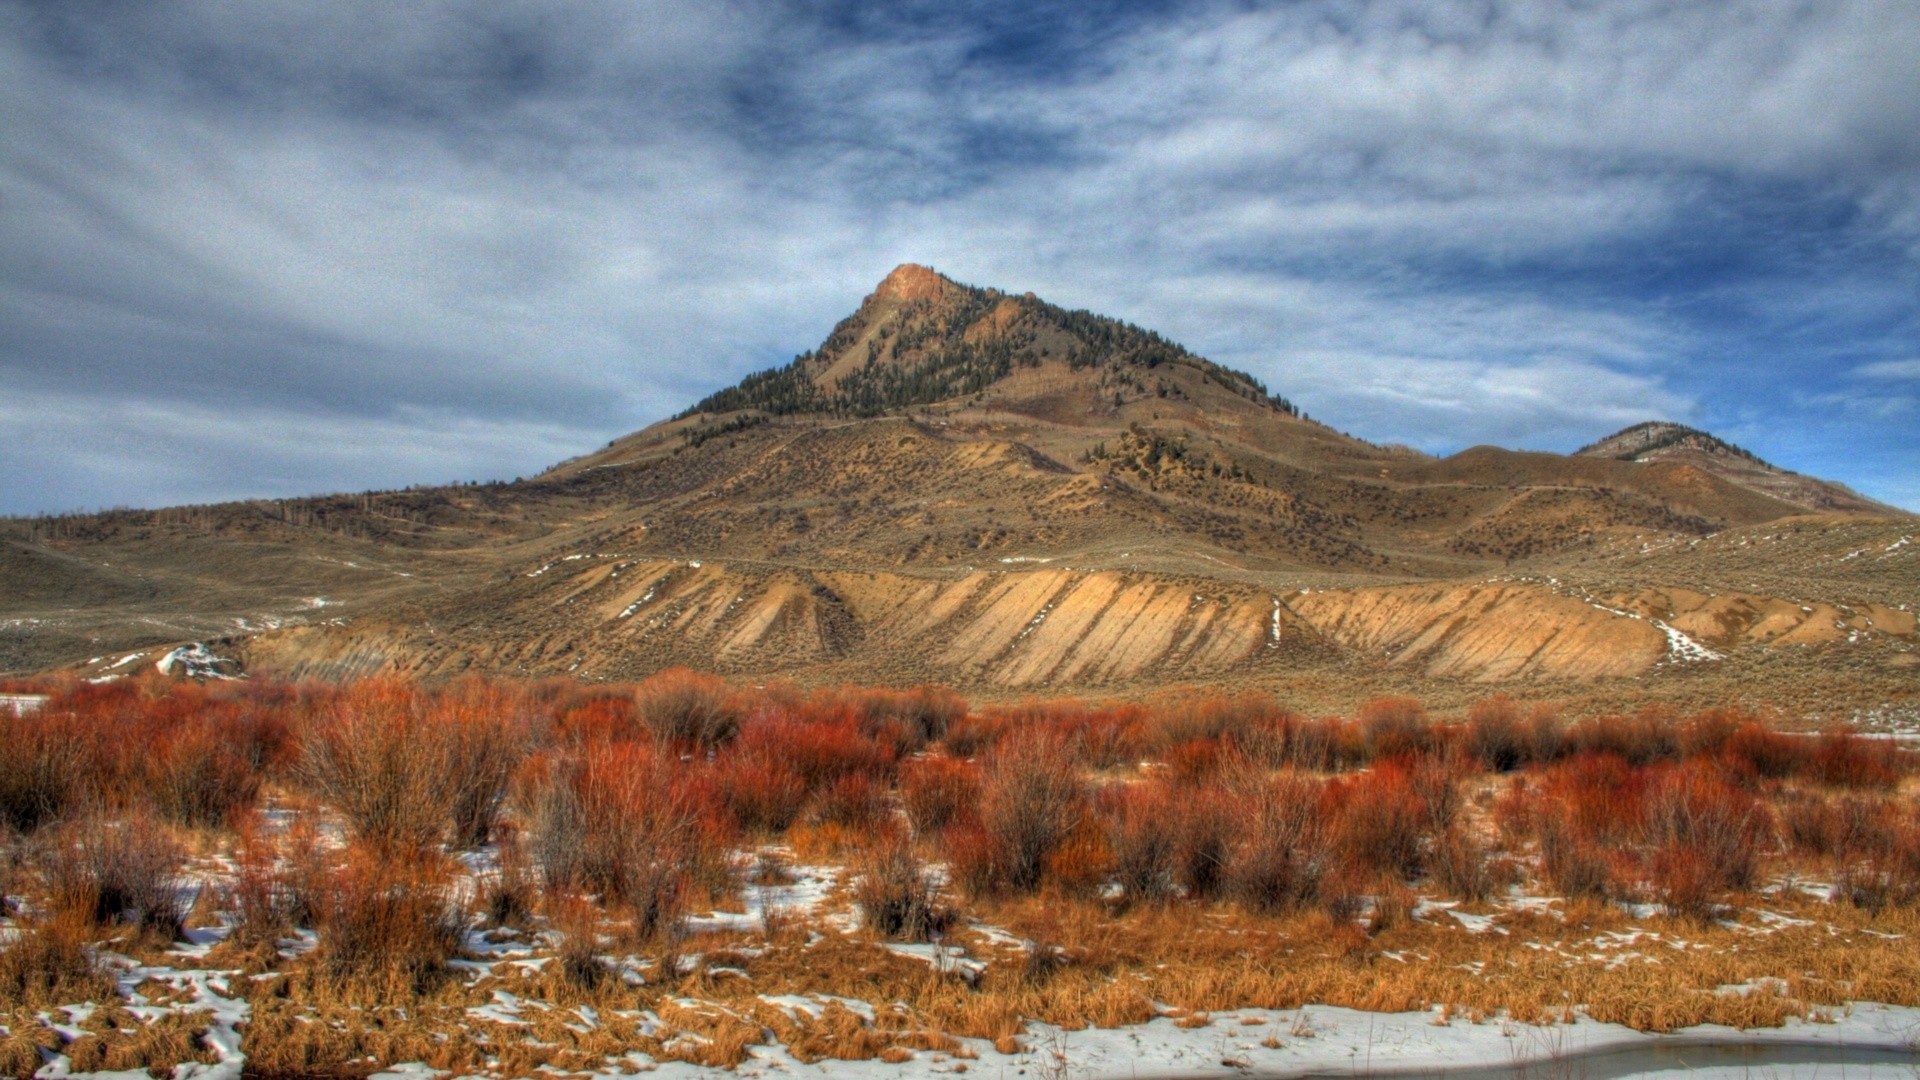 1920x1080 Deserts - Peak Desert Winter Shribs Dry Mountain Clouds Photos Download for  HD 16:9